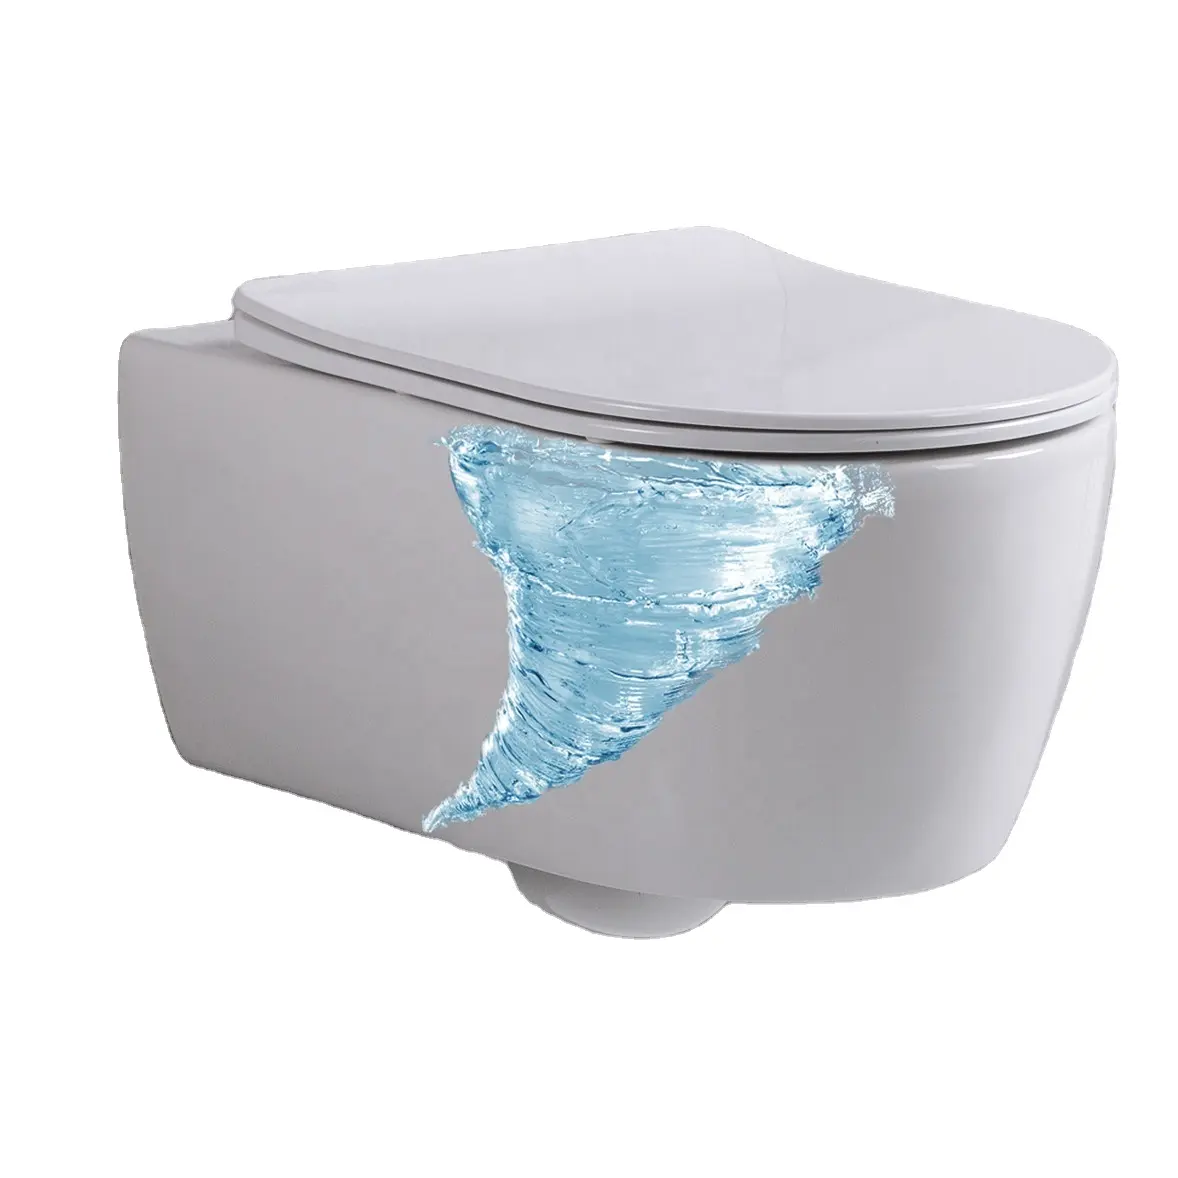 W017 In-wall concealed cistern for wall hung toilet -- fit for Geberit actuator plate